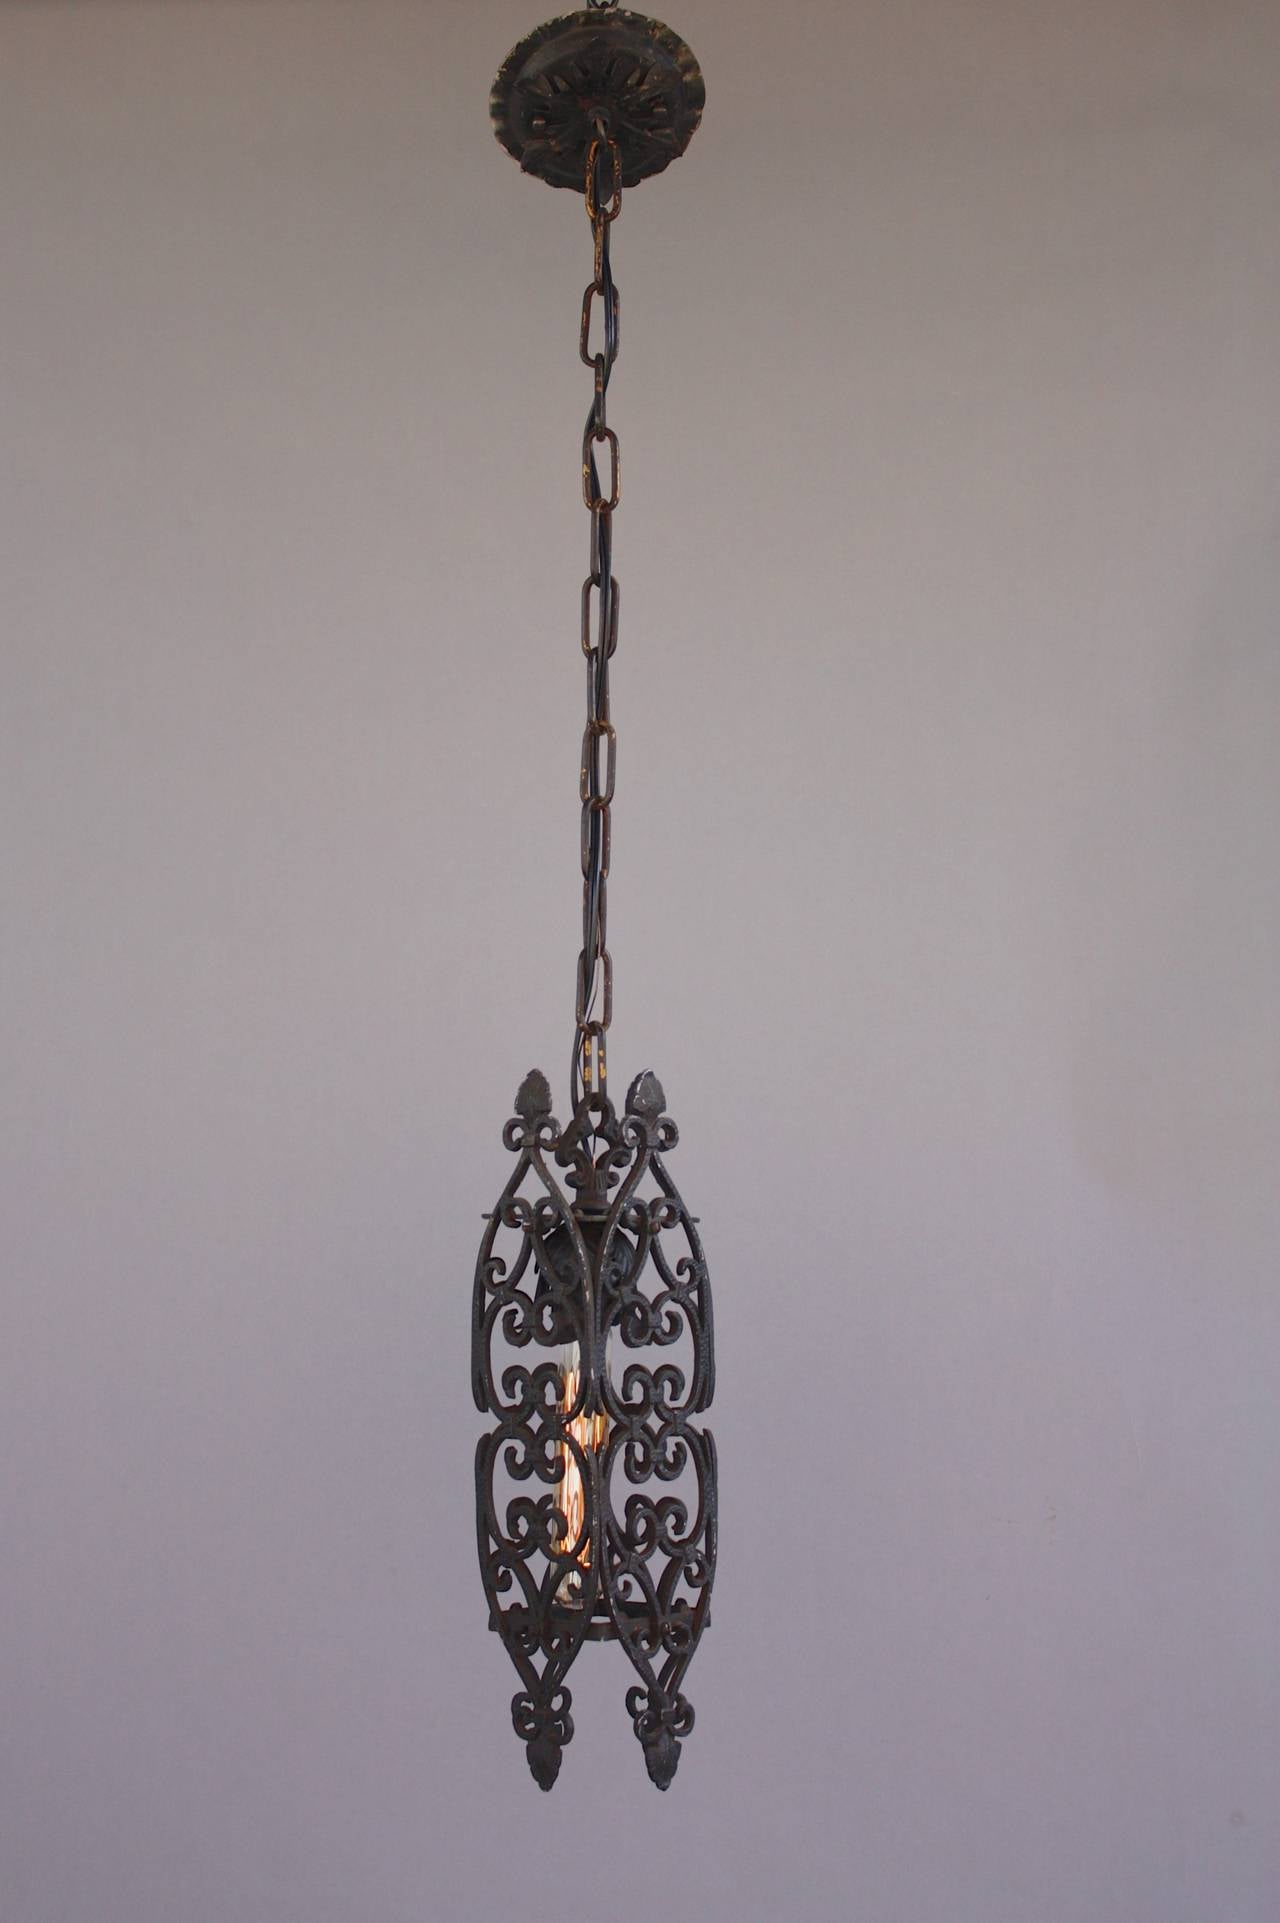 Circa 1920's narrow pendant with scroll motif. The body of the fixture is 15.5